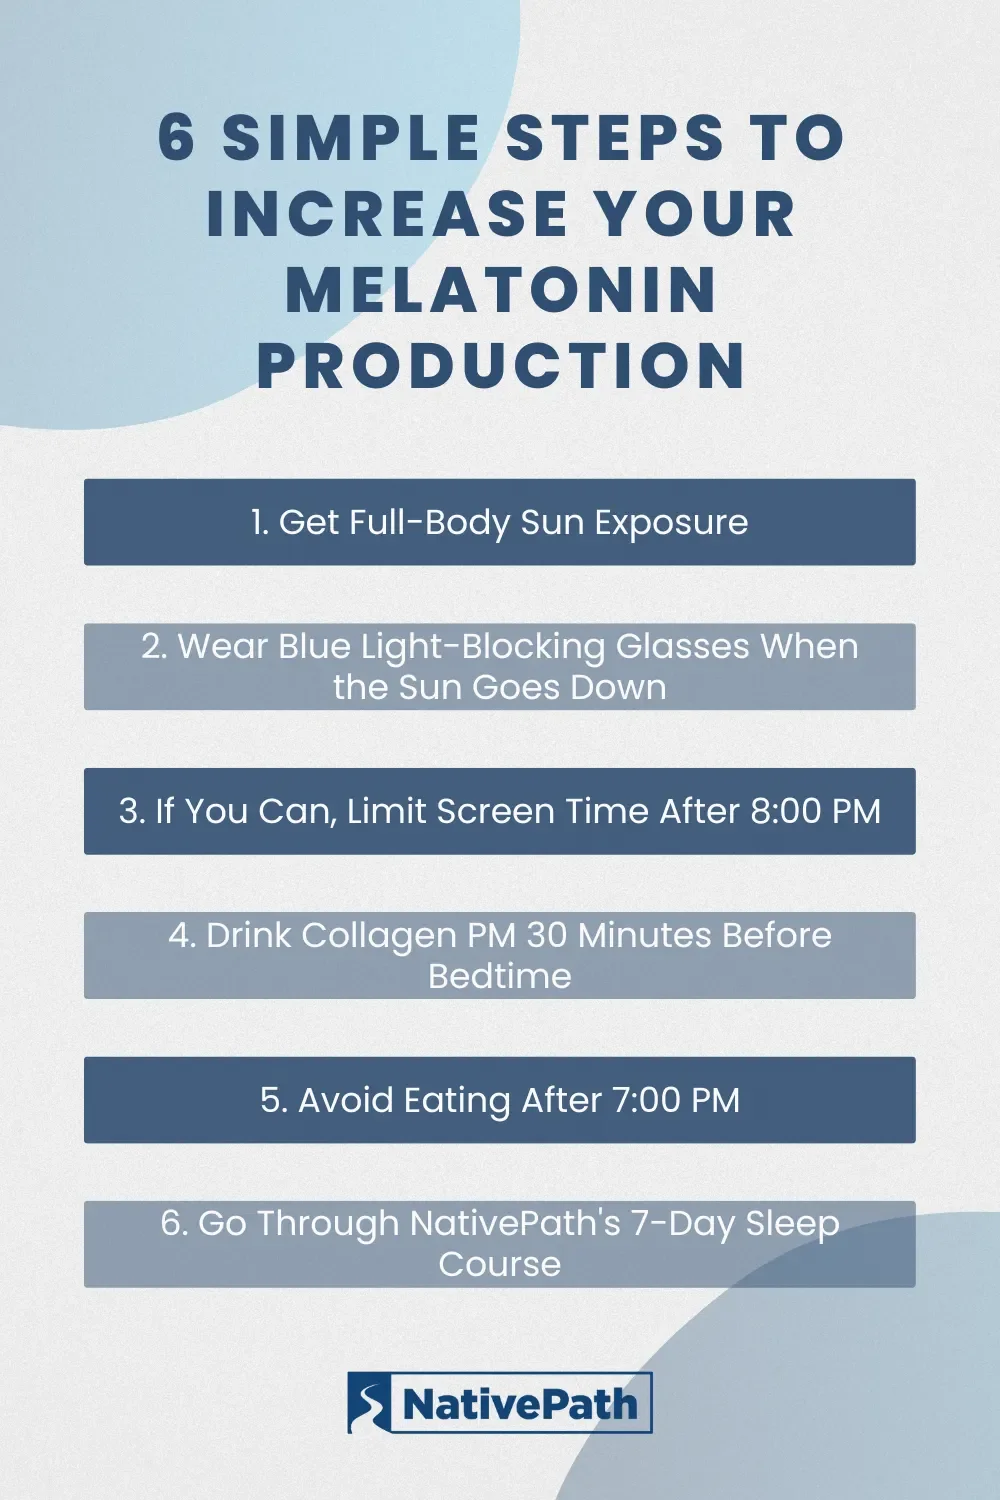 Infographic listing 6 simple steps to increase your melatonin production.